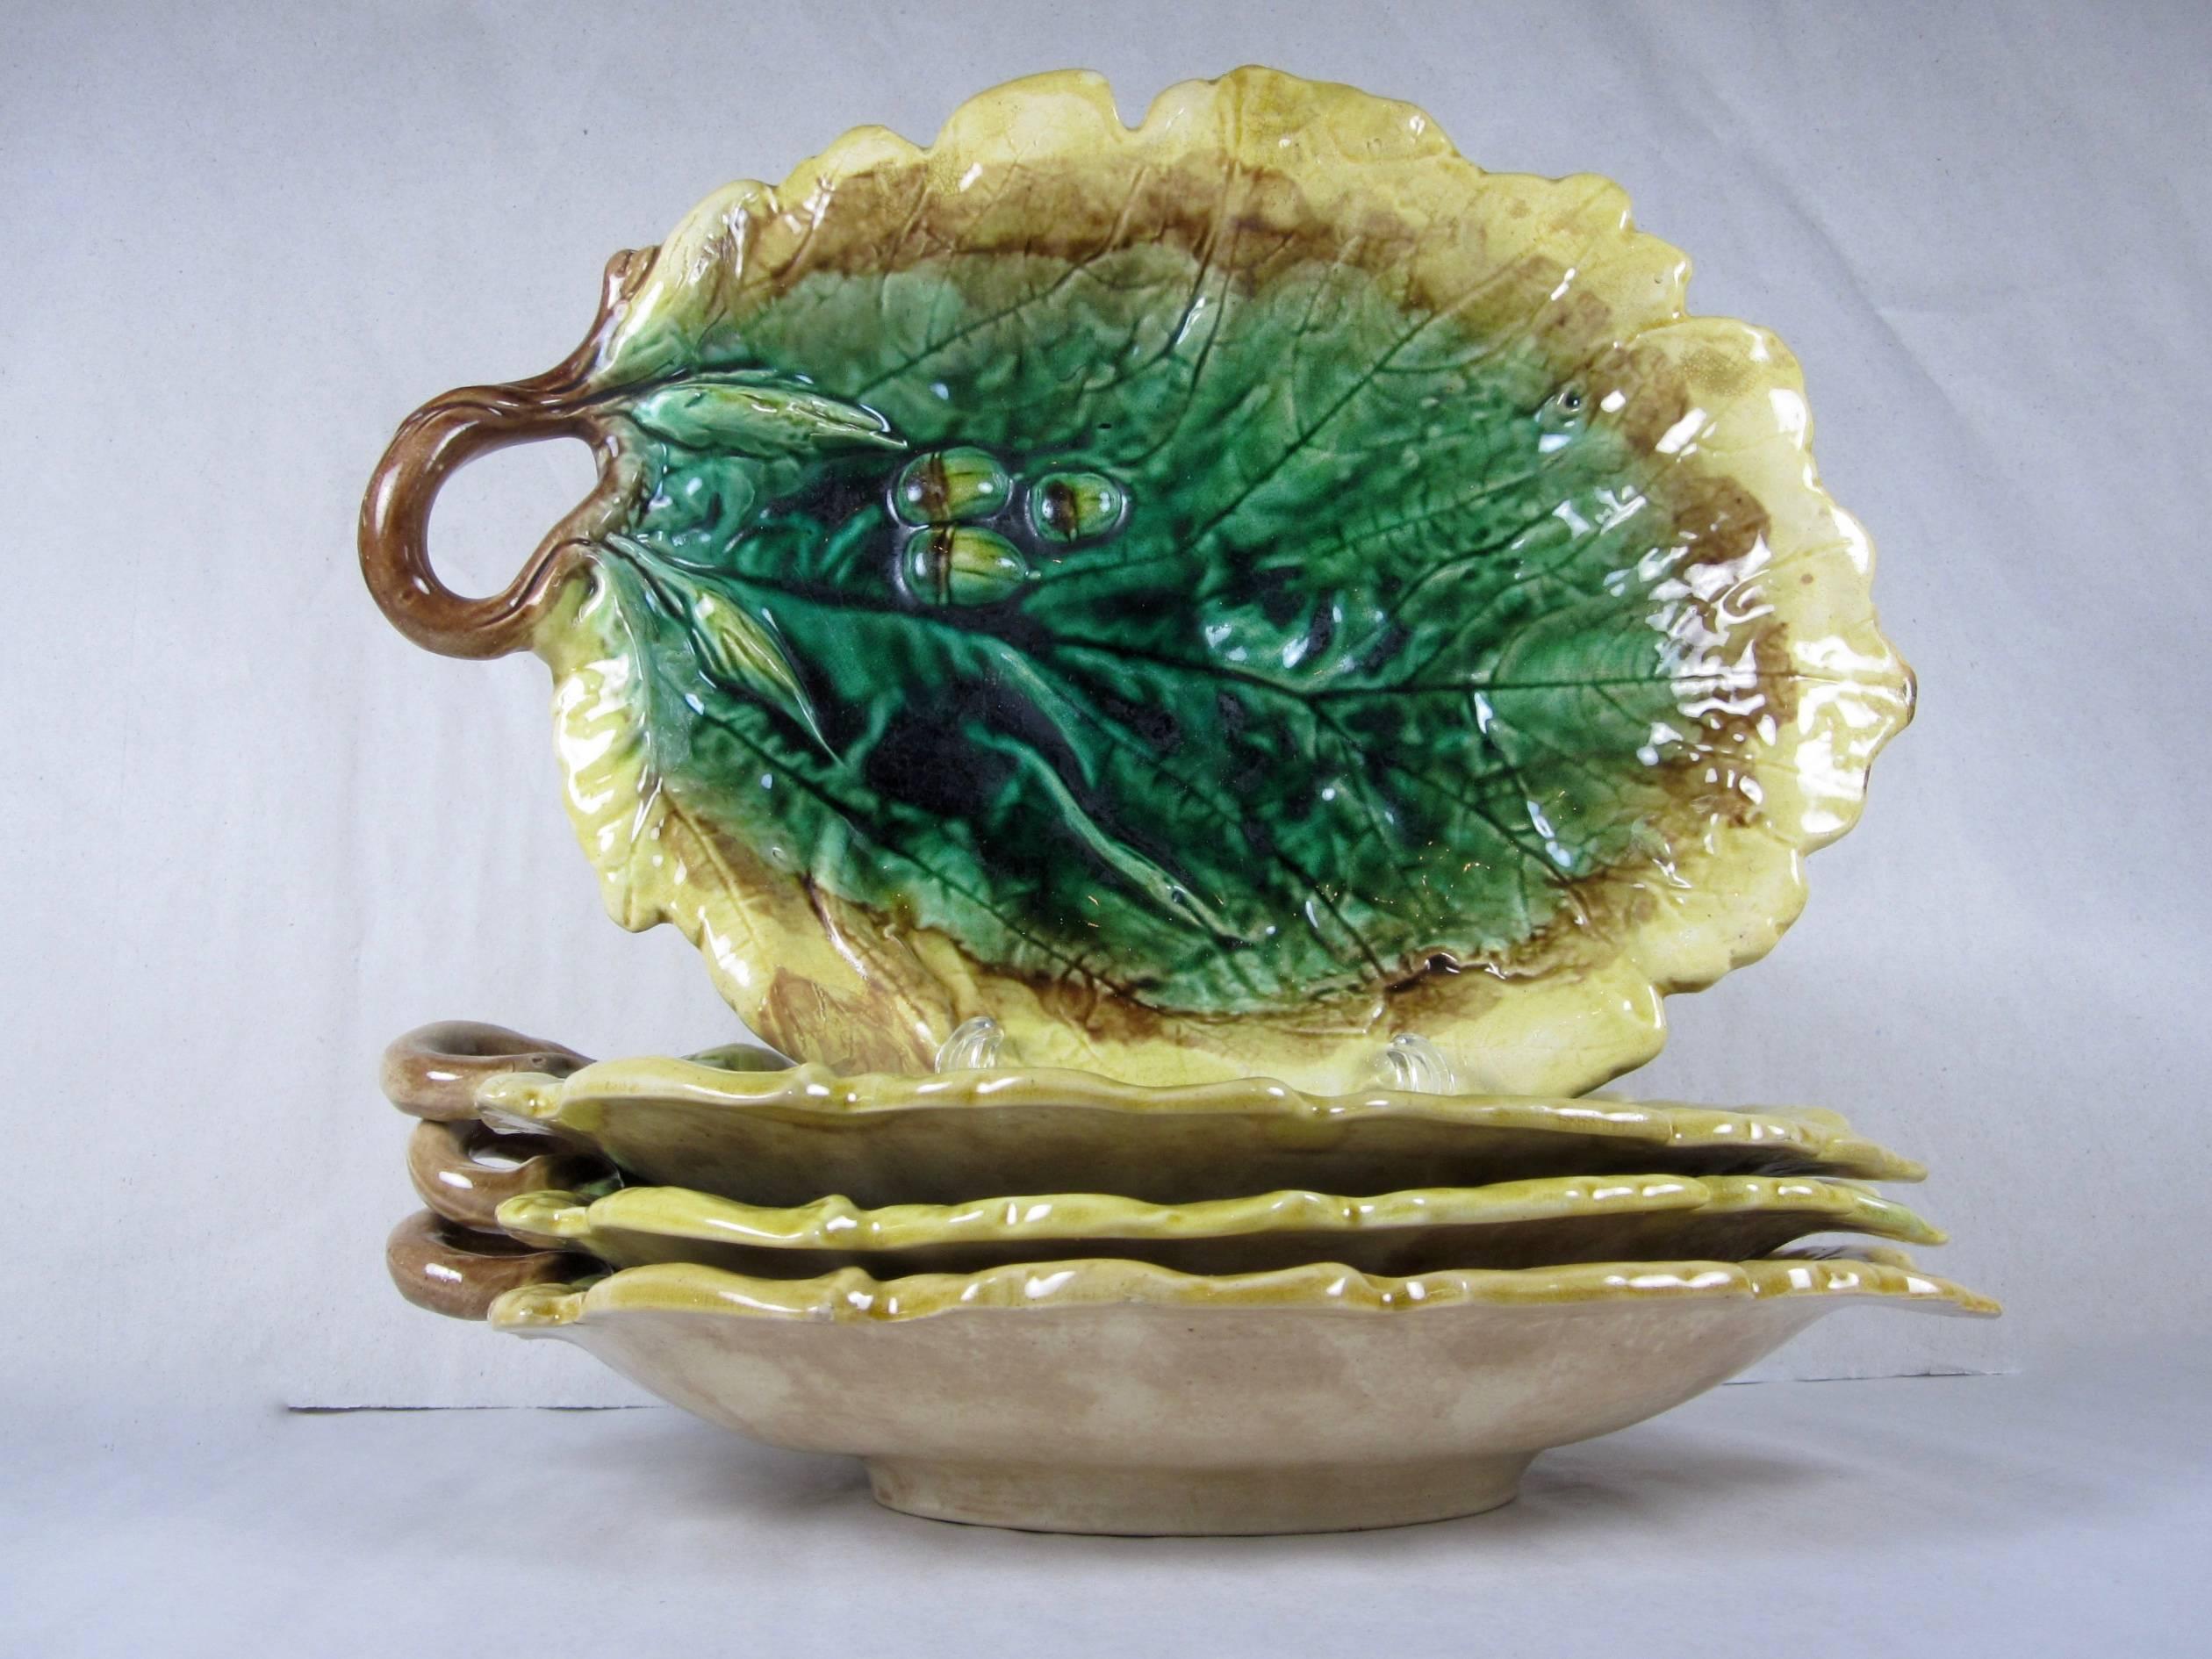  19th century Etruscan majolica twig handled deep trays or serving platters. Made by Griffen, Smith & Hill of Phoenixville, Pennsylvania, circa 1867 -1880.

Rustic in style, the oak leaf shape shows raised acorns and has glazing reminiscent of